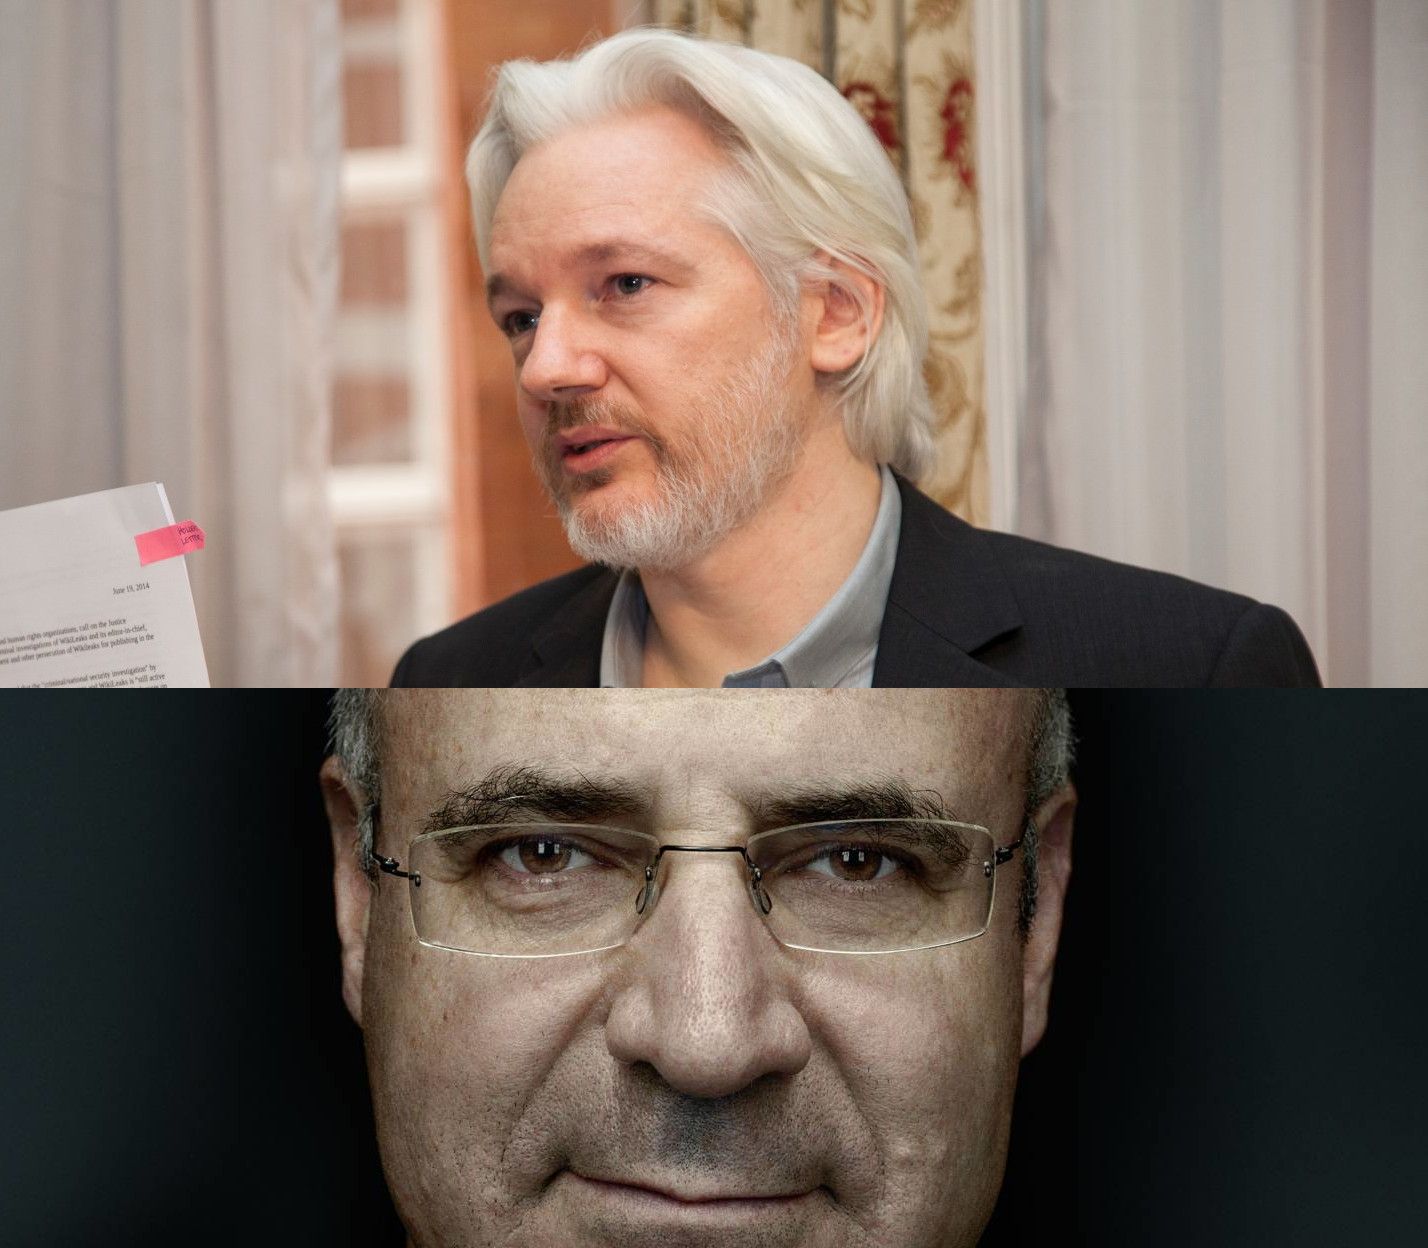 Assange lawyers’ links to US govt & Bill Browder raises questions The network of lawyers in conflicting roles in Browder, Assange and US government cases raises questions about Julian Assange’s defense.